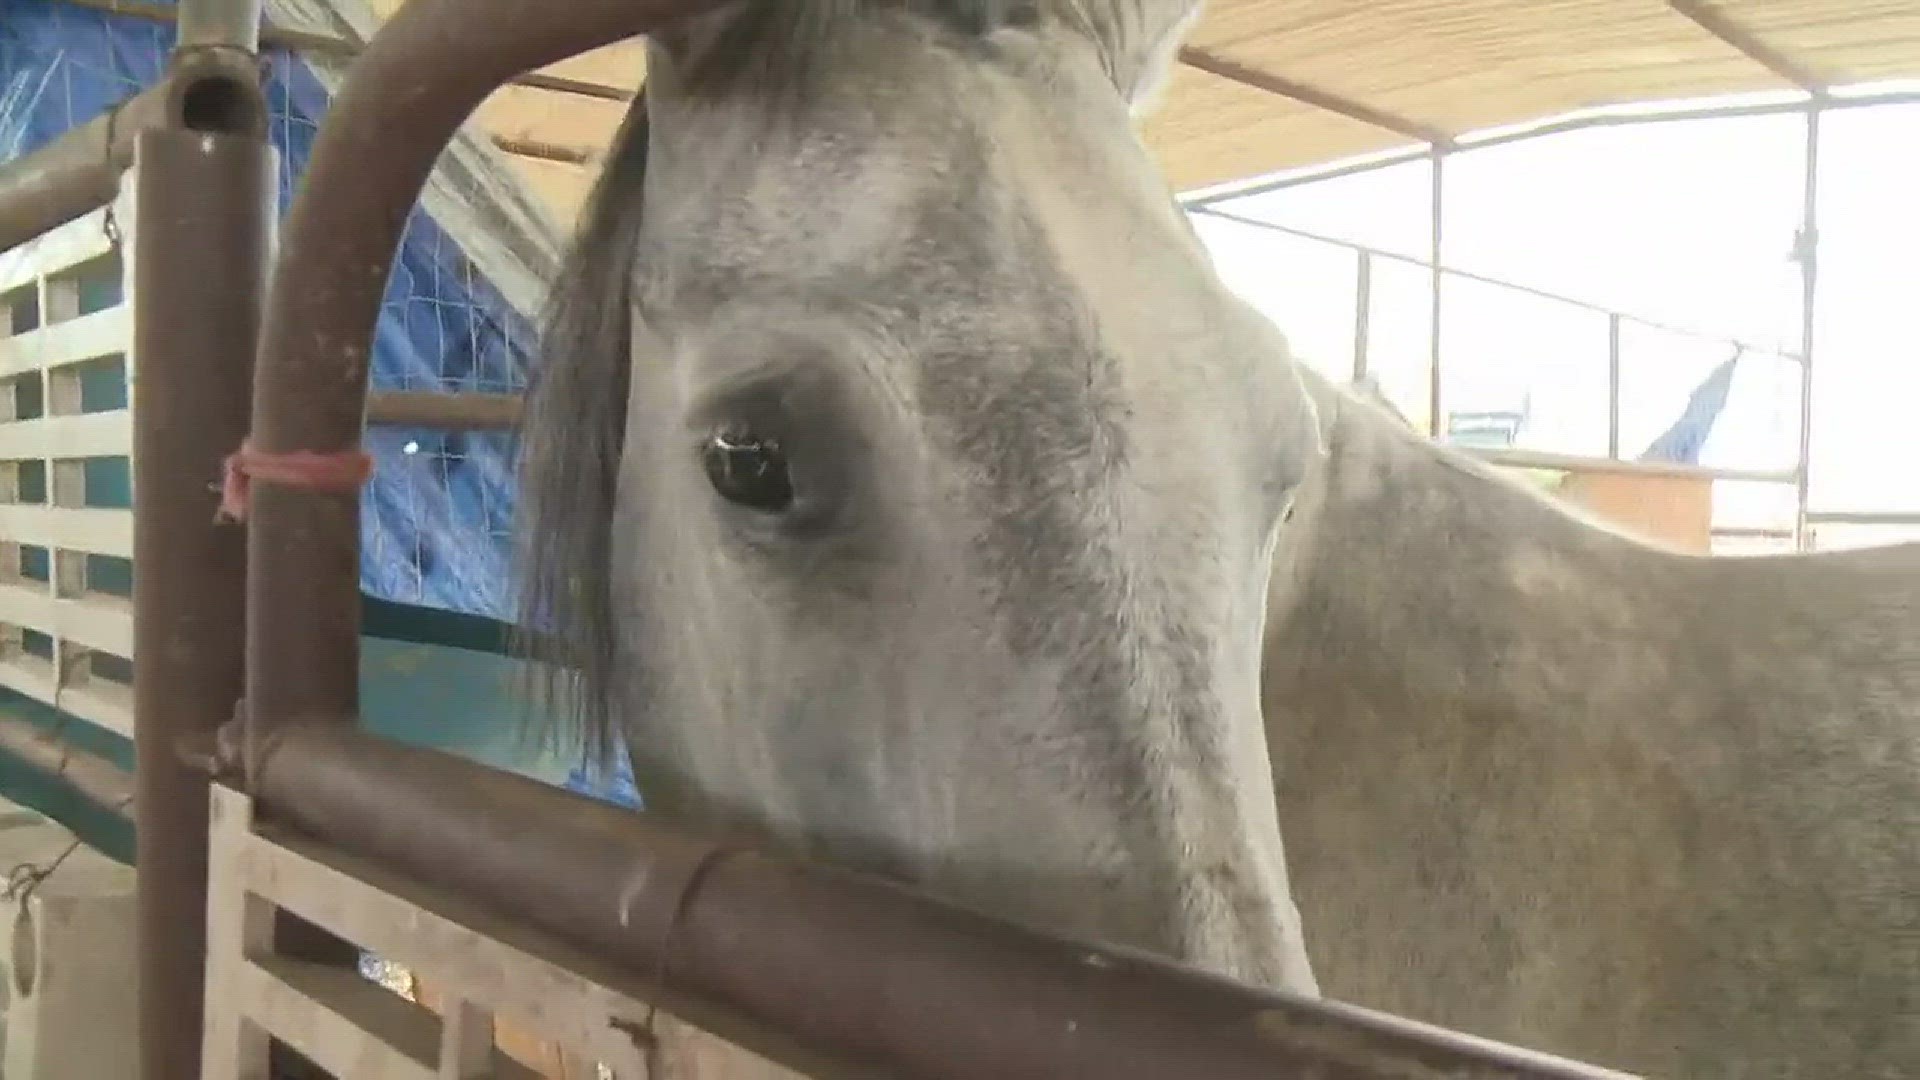 The horse owners recount terrifying moments of the three suspects shooting at them, hitting two of their horses in Laveen.